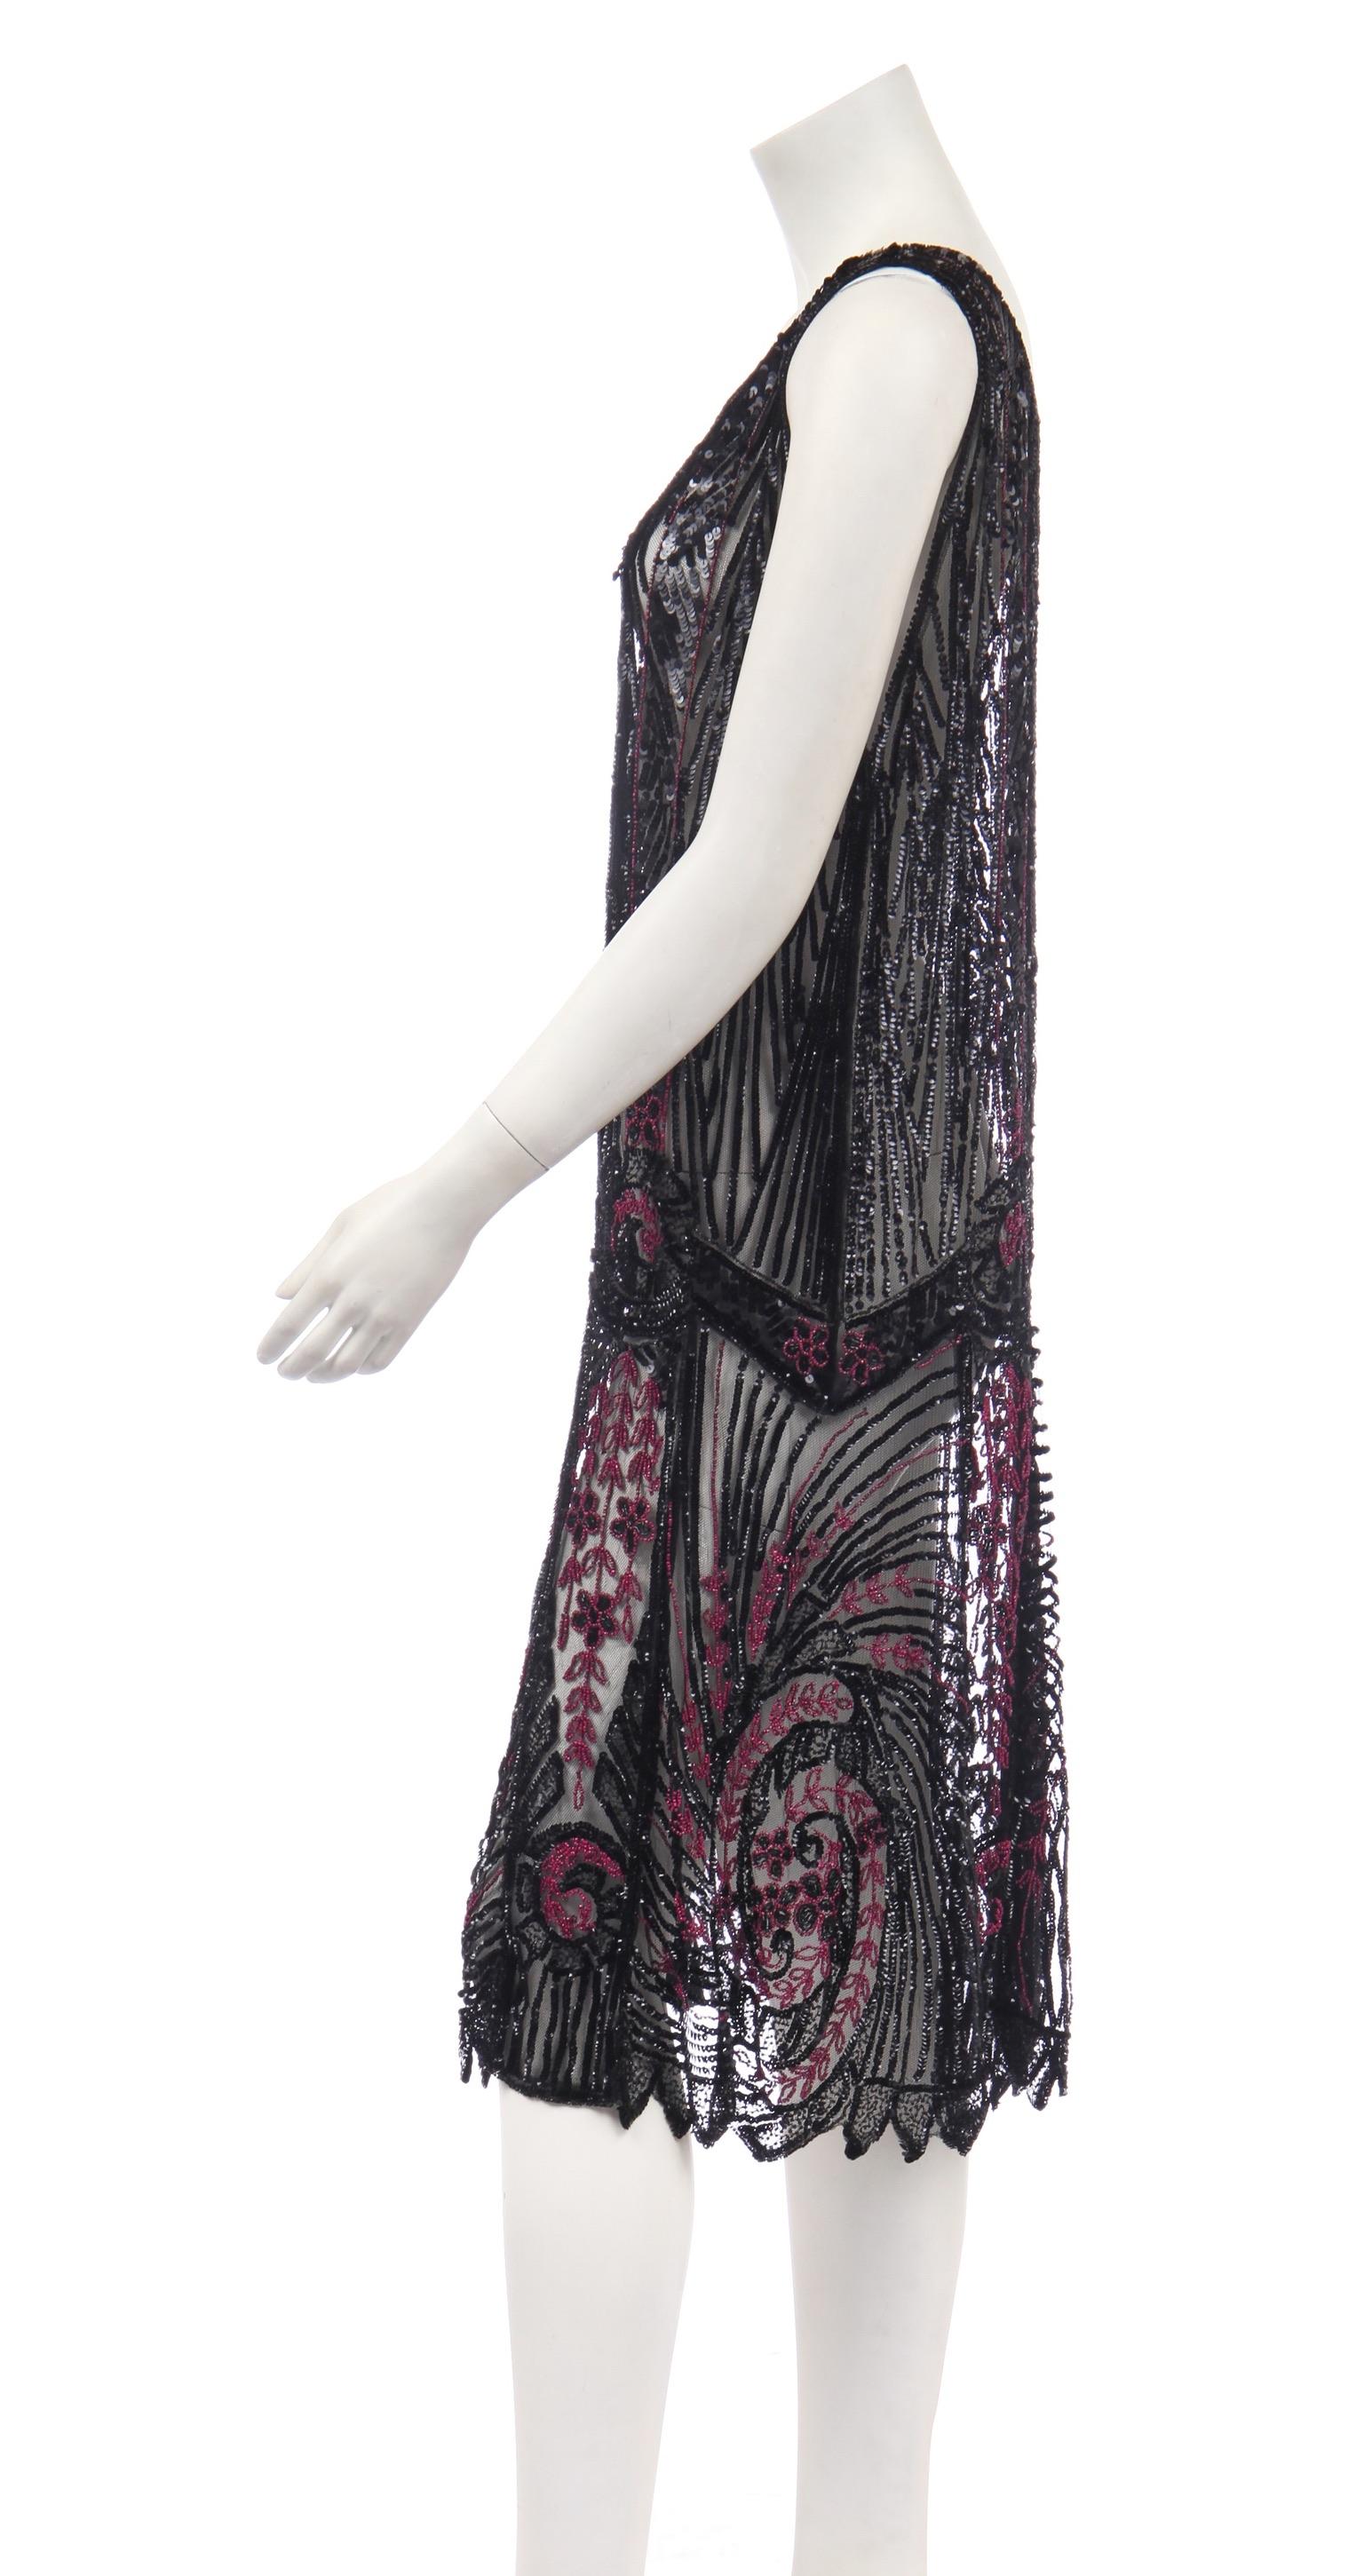 - 1920s Beaded flapper dress
- Black tule embellished with incredible 
  sequin and bead work
- Great Gatsby style
- Size .......
- Sold by Mae Vintage London
